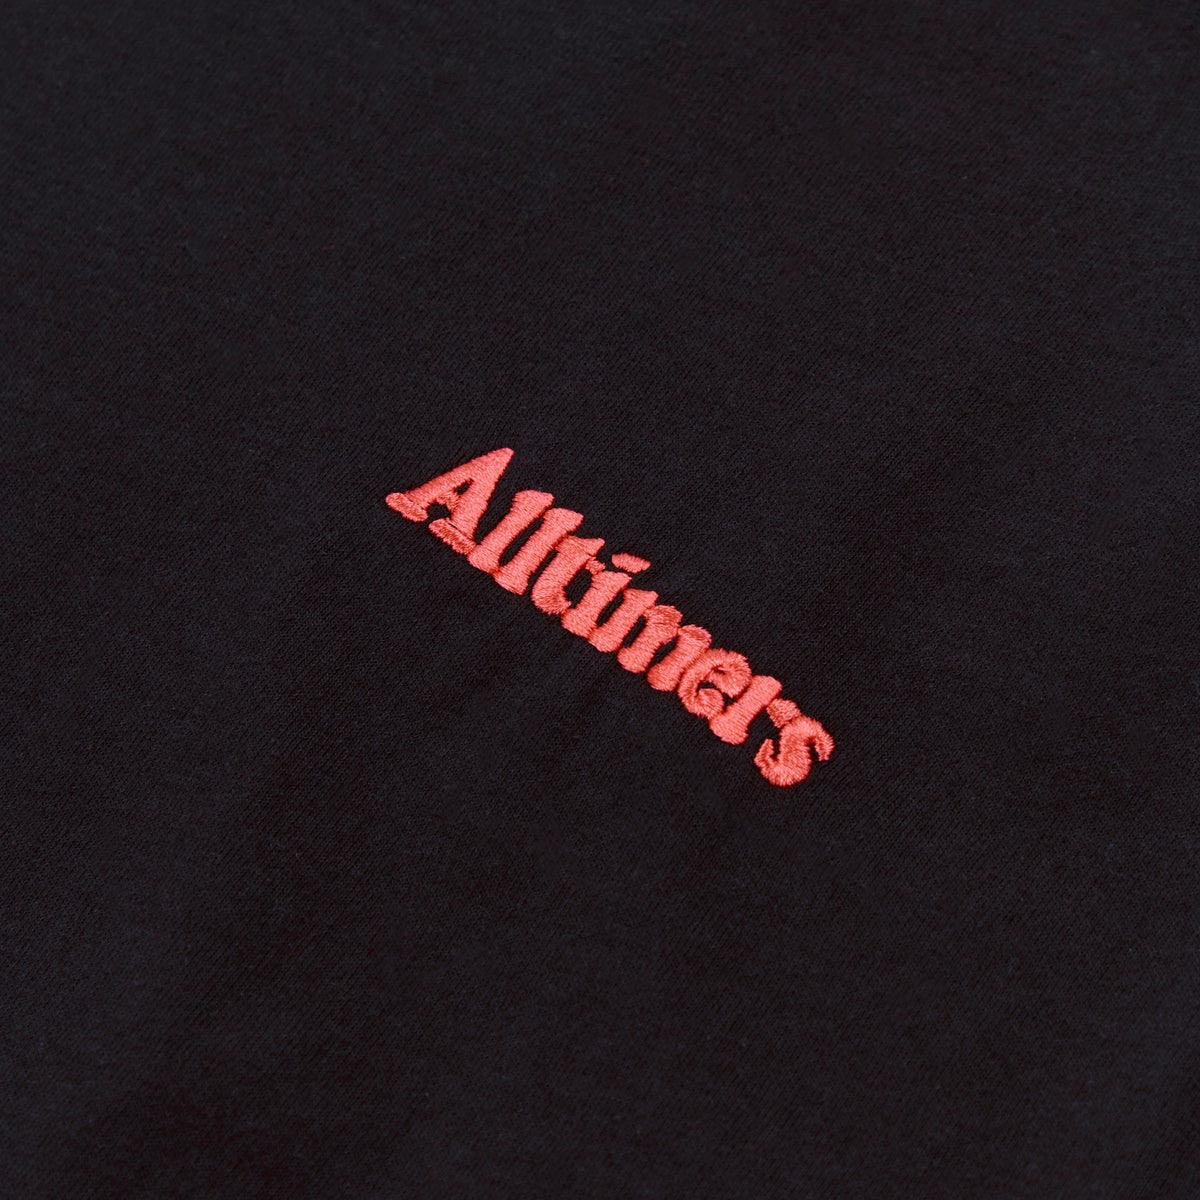 Alltimers Tiny Broadway Embroidered T-Shirt - Black image 2